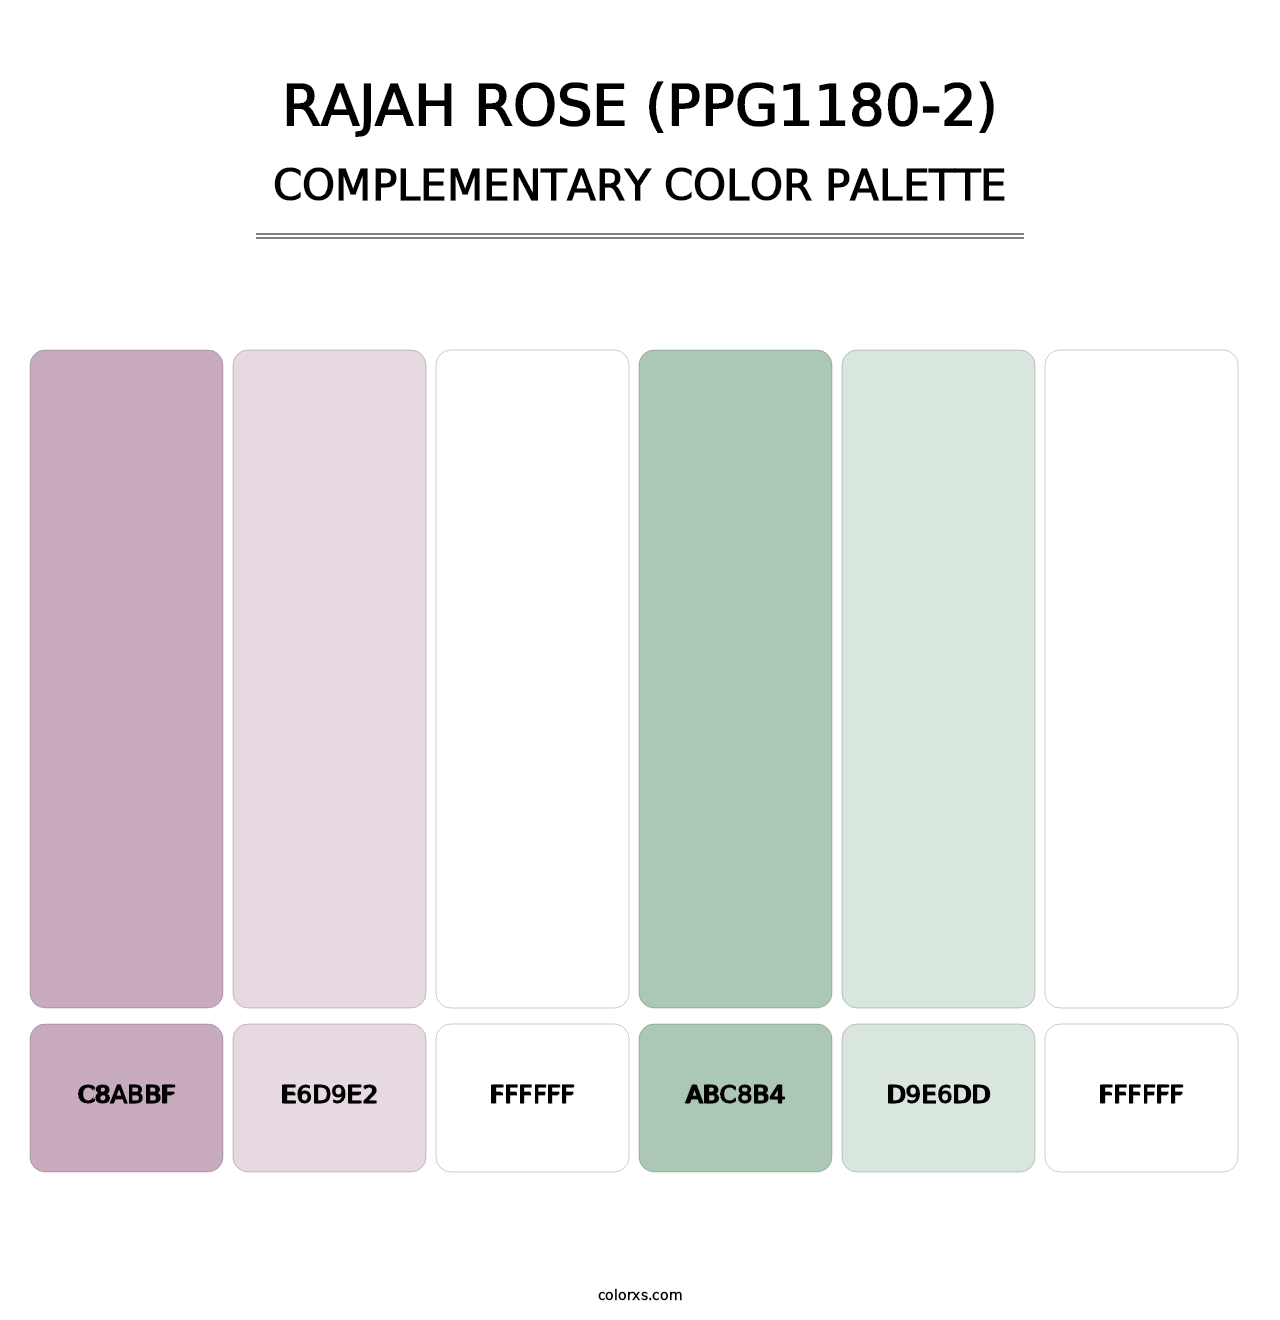 Rajah Rose (PPG1180-2) - Complementary Color Palette